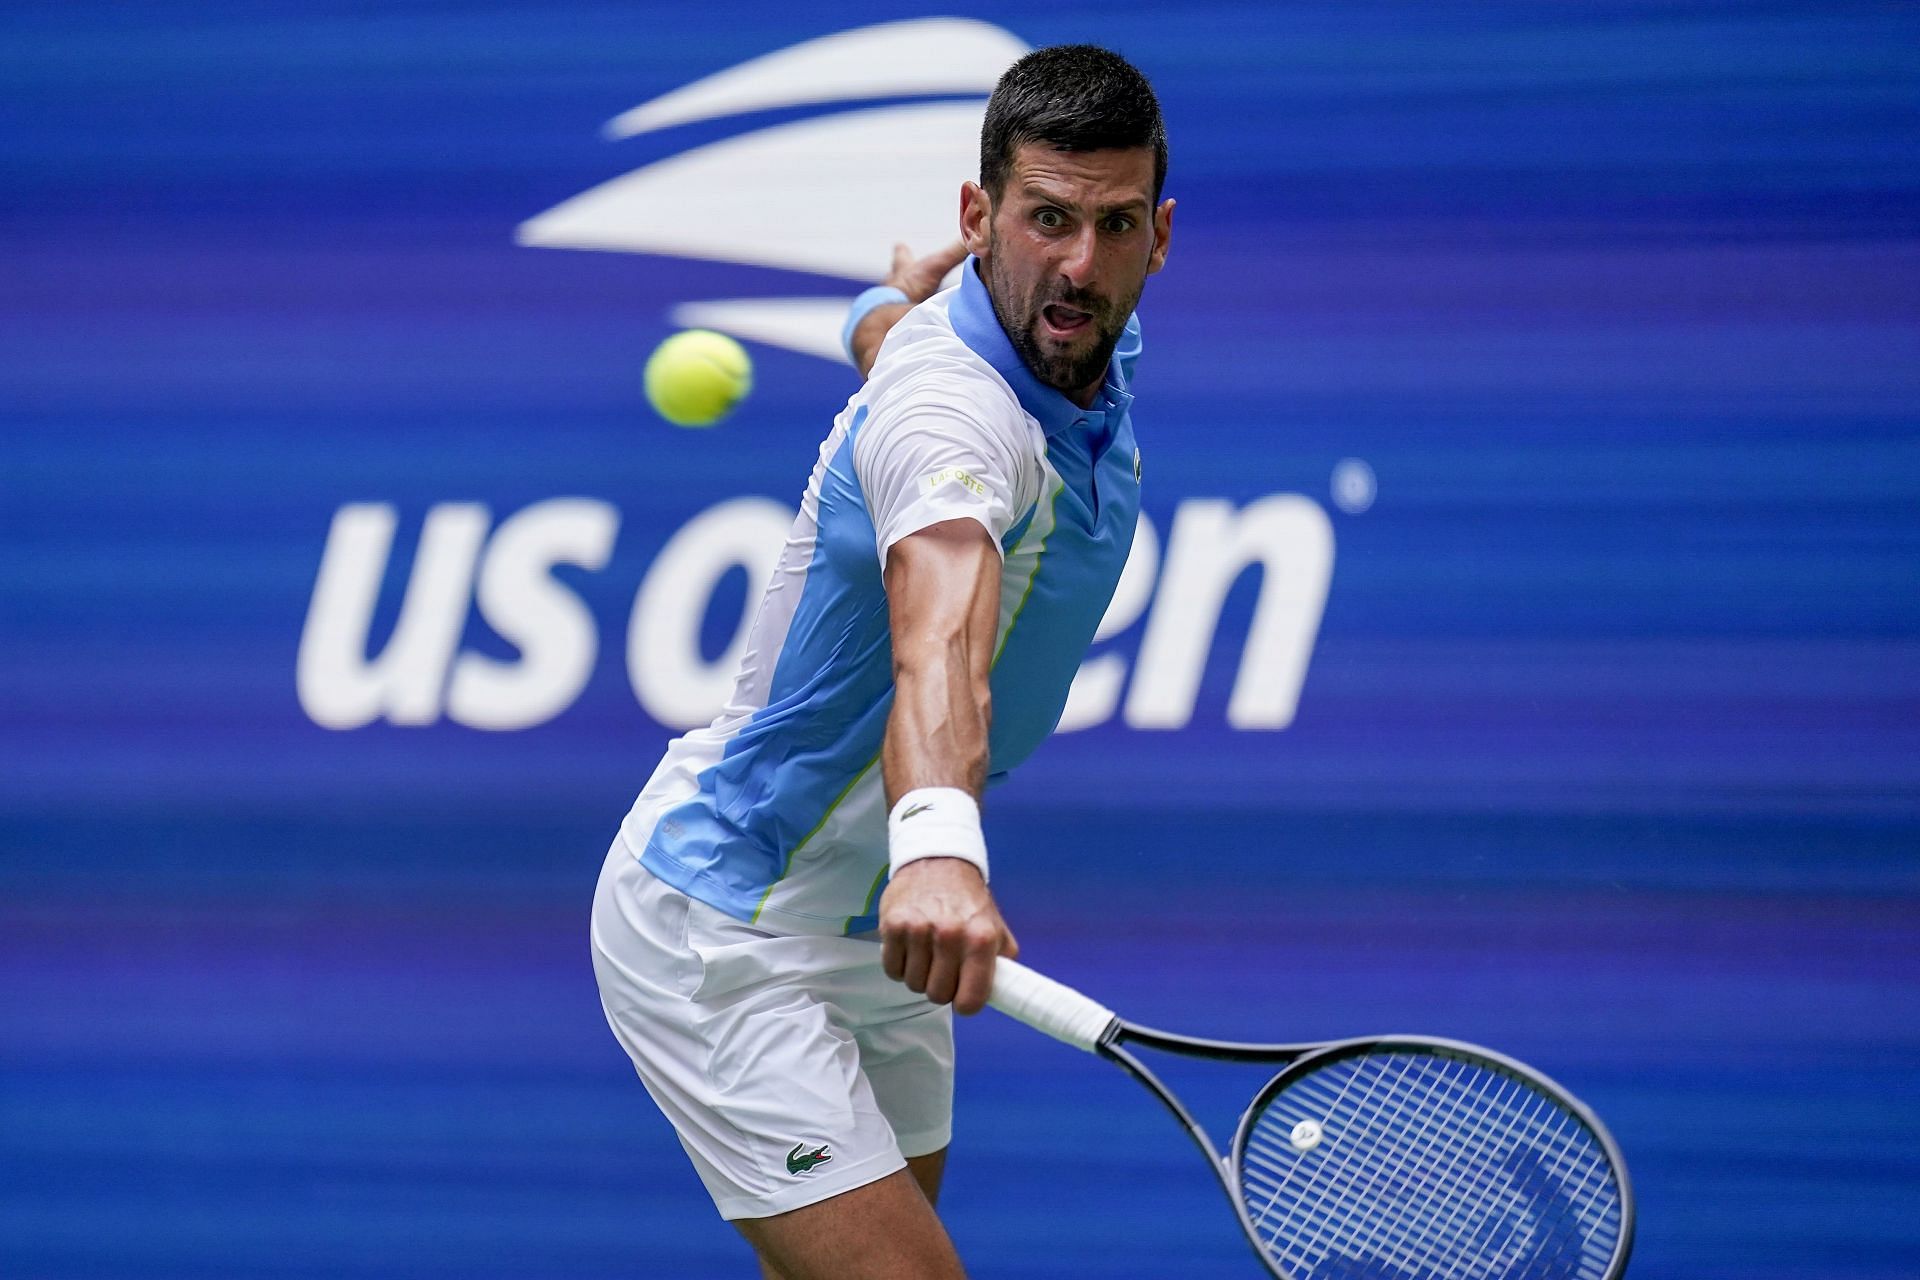 Novak Djokovic in action at the US Open